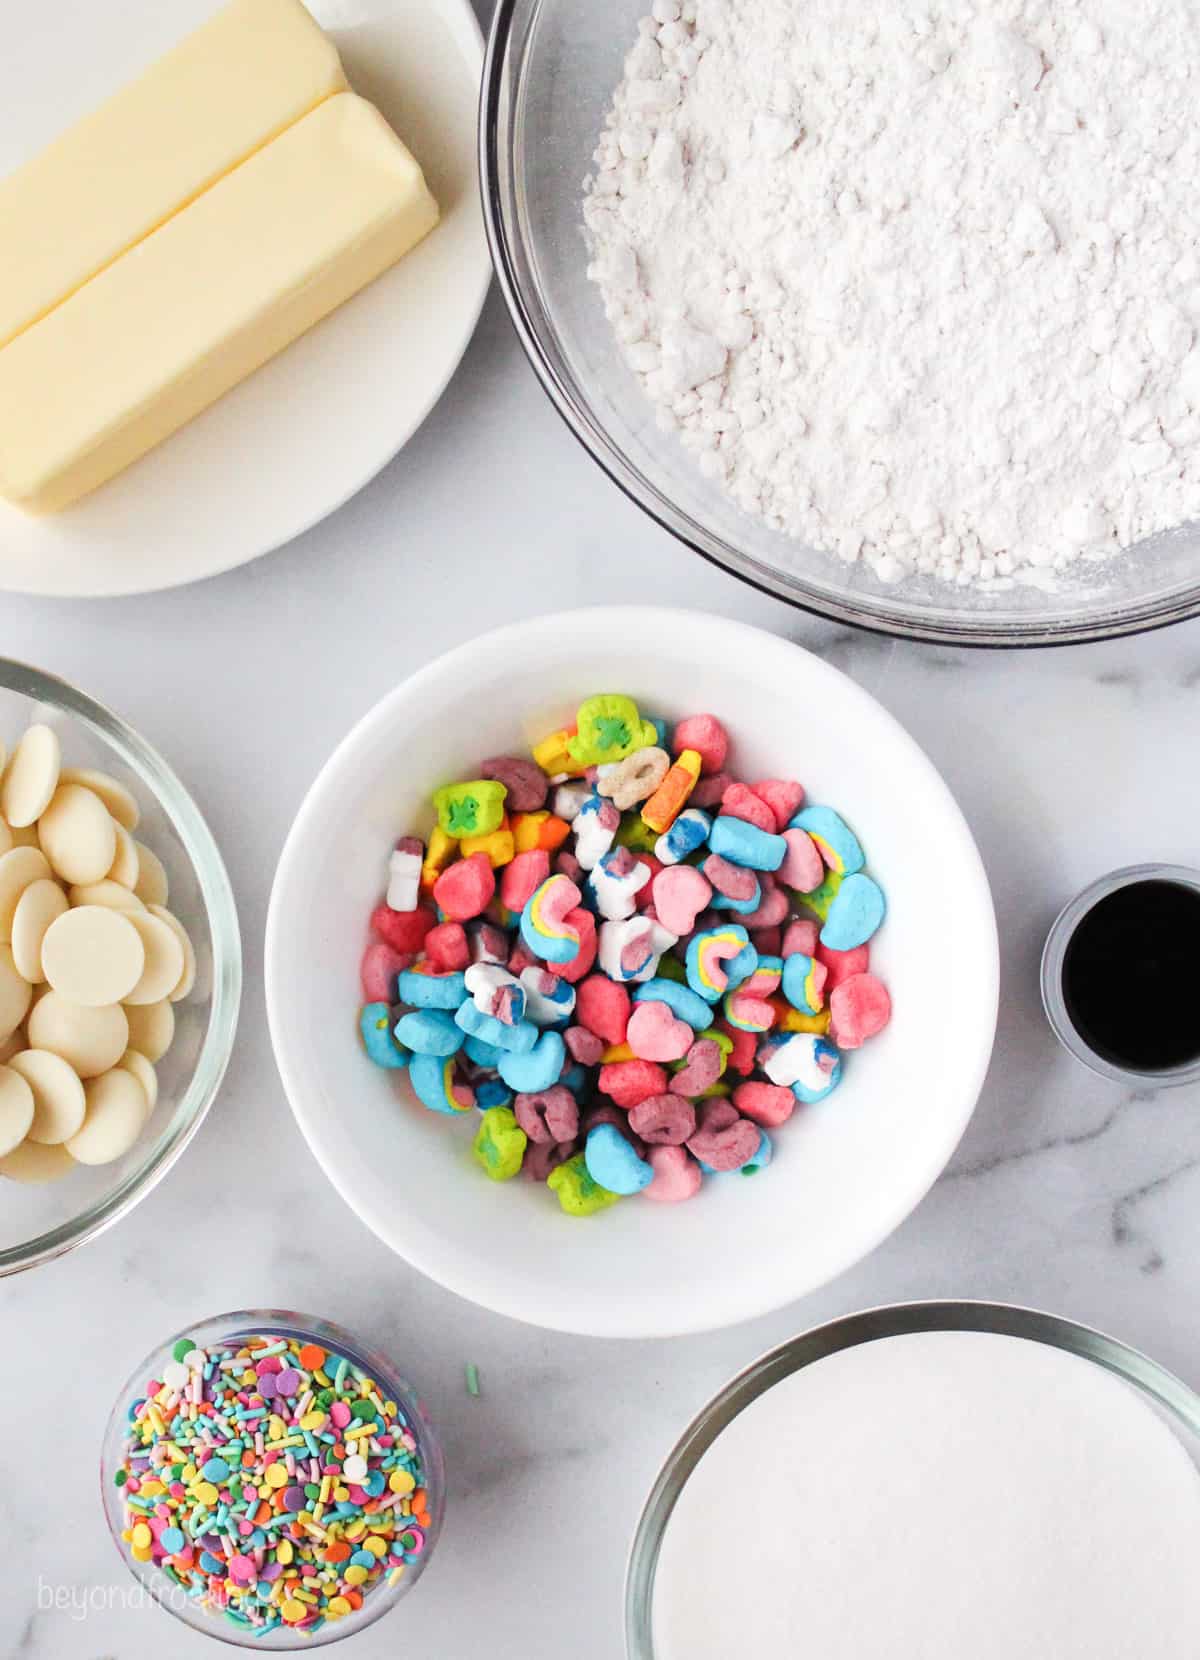 The ingredients for Lucky Charms cookies.